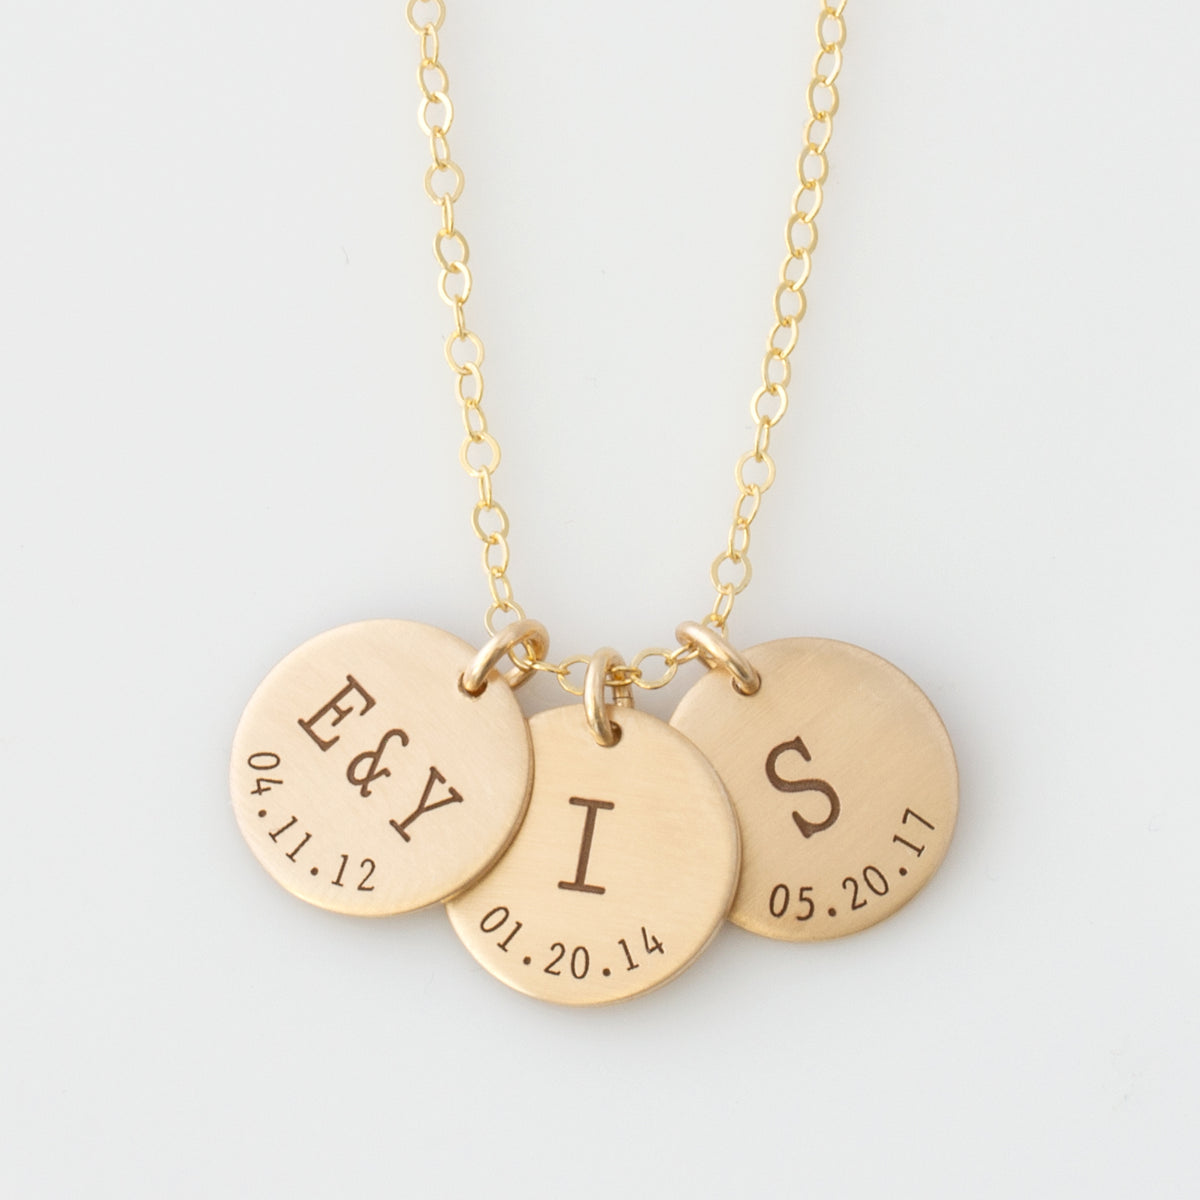 Half inch Wide Initial Disc • Additional Personalized Charms • Silver or Gold L / 14K Gold Filled